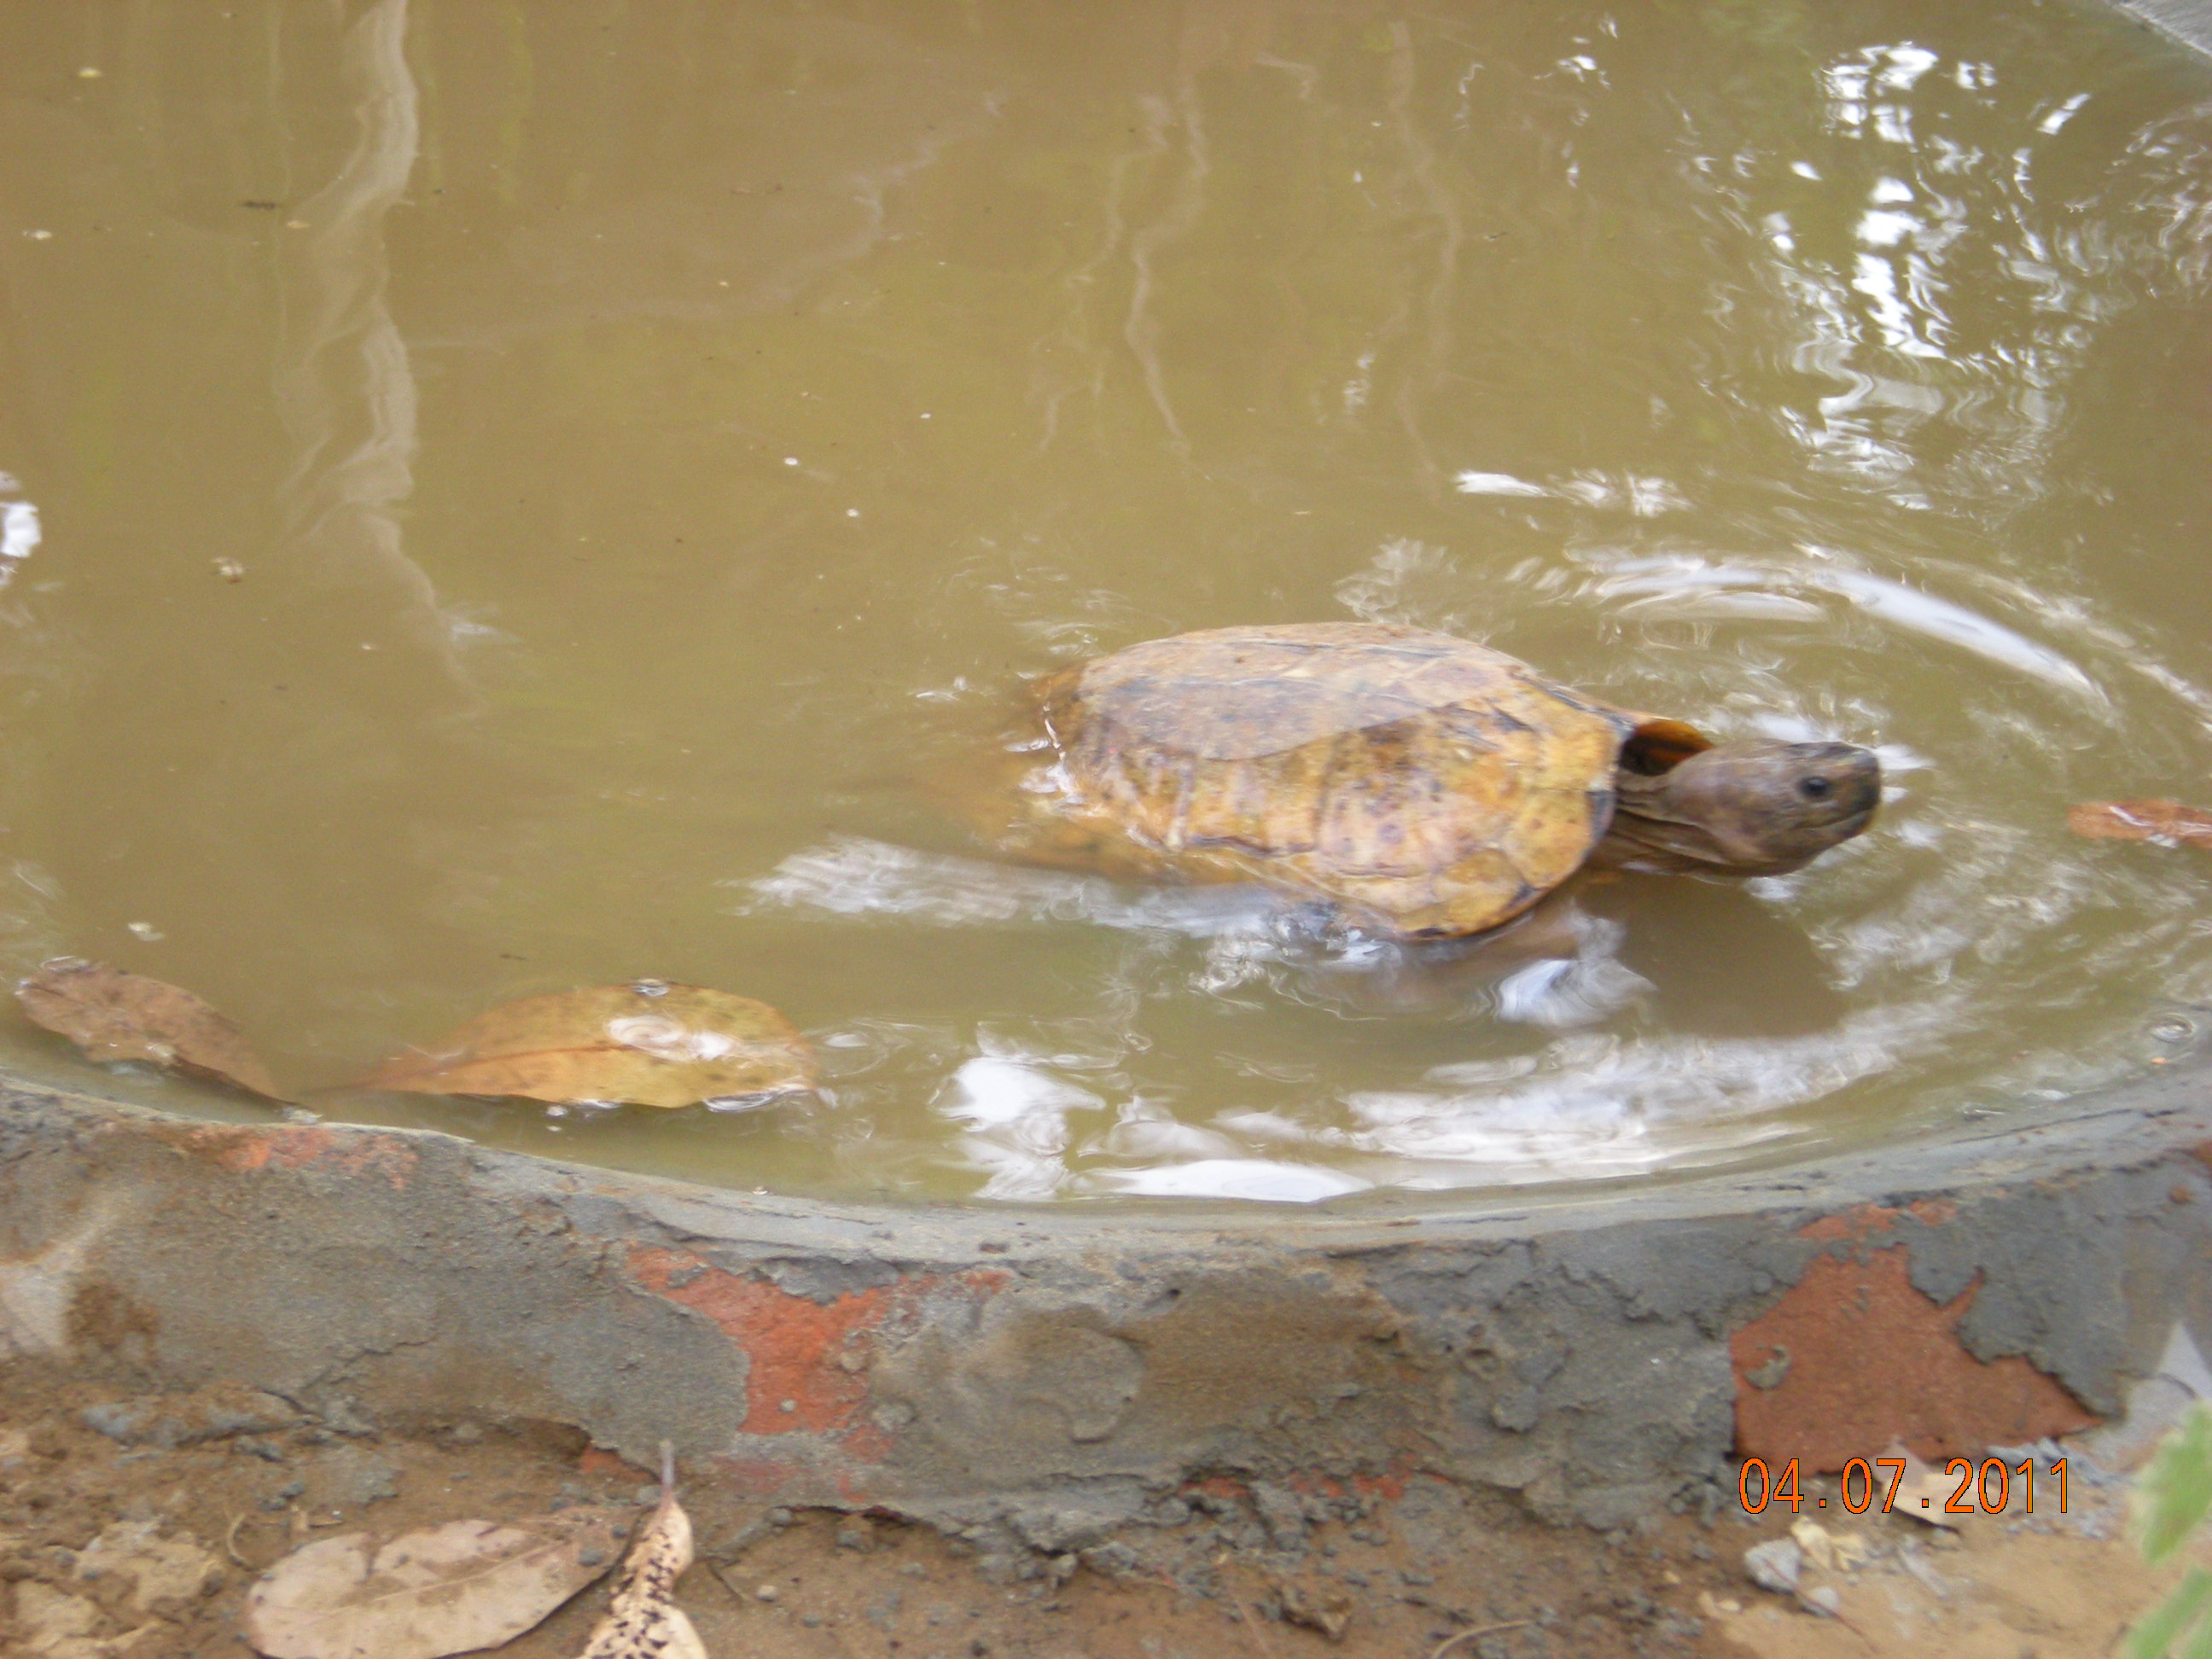 One_of_the_turtles_takes_a_quick_dip_in_the_shallow_pool